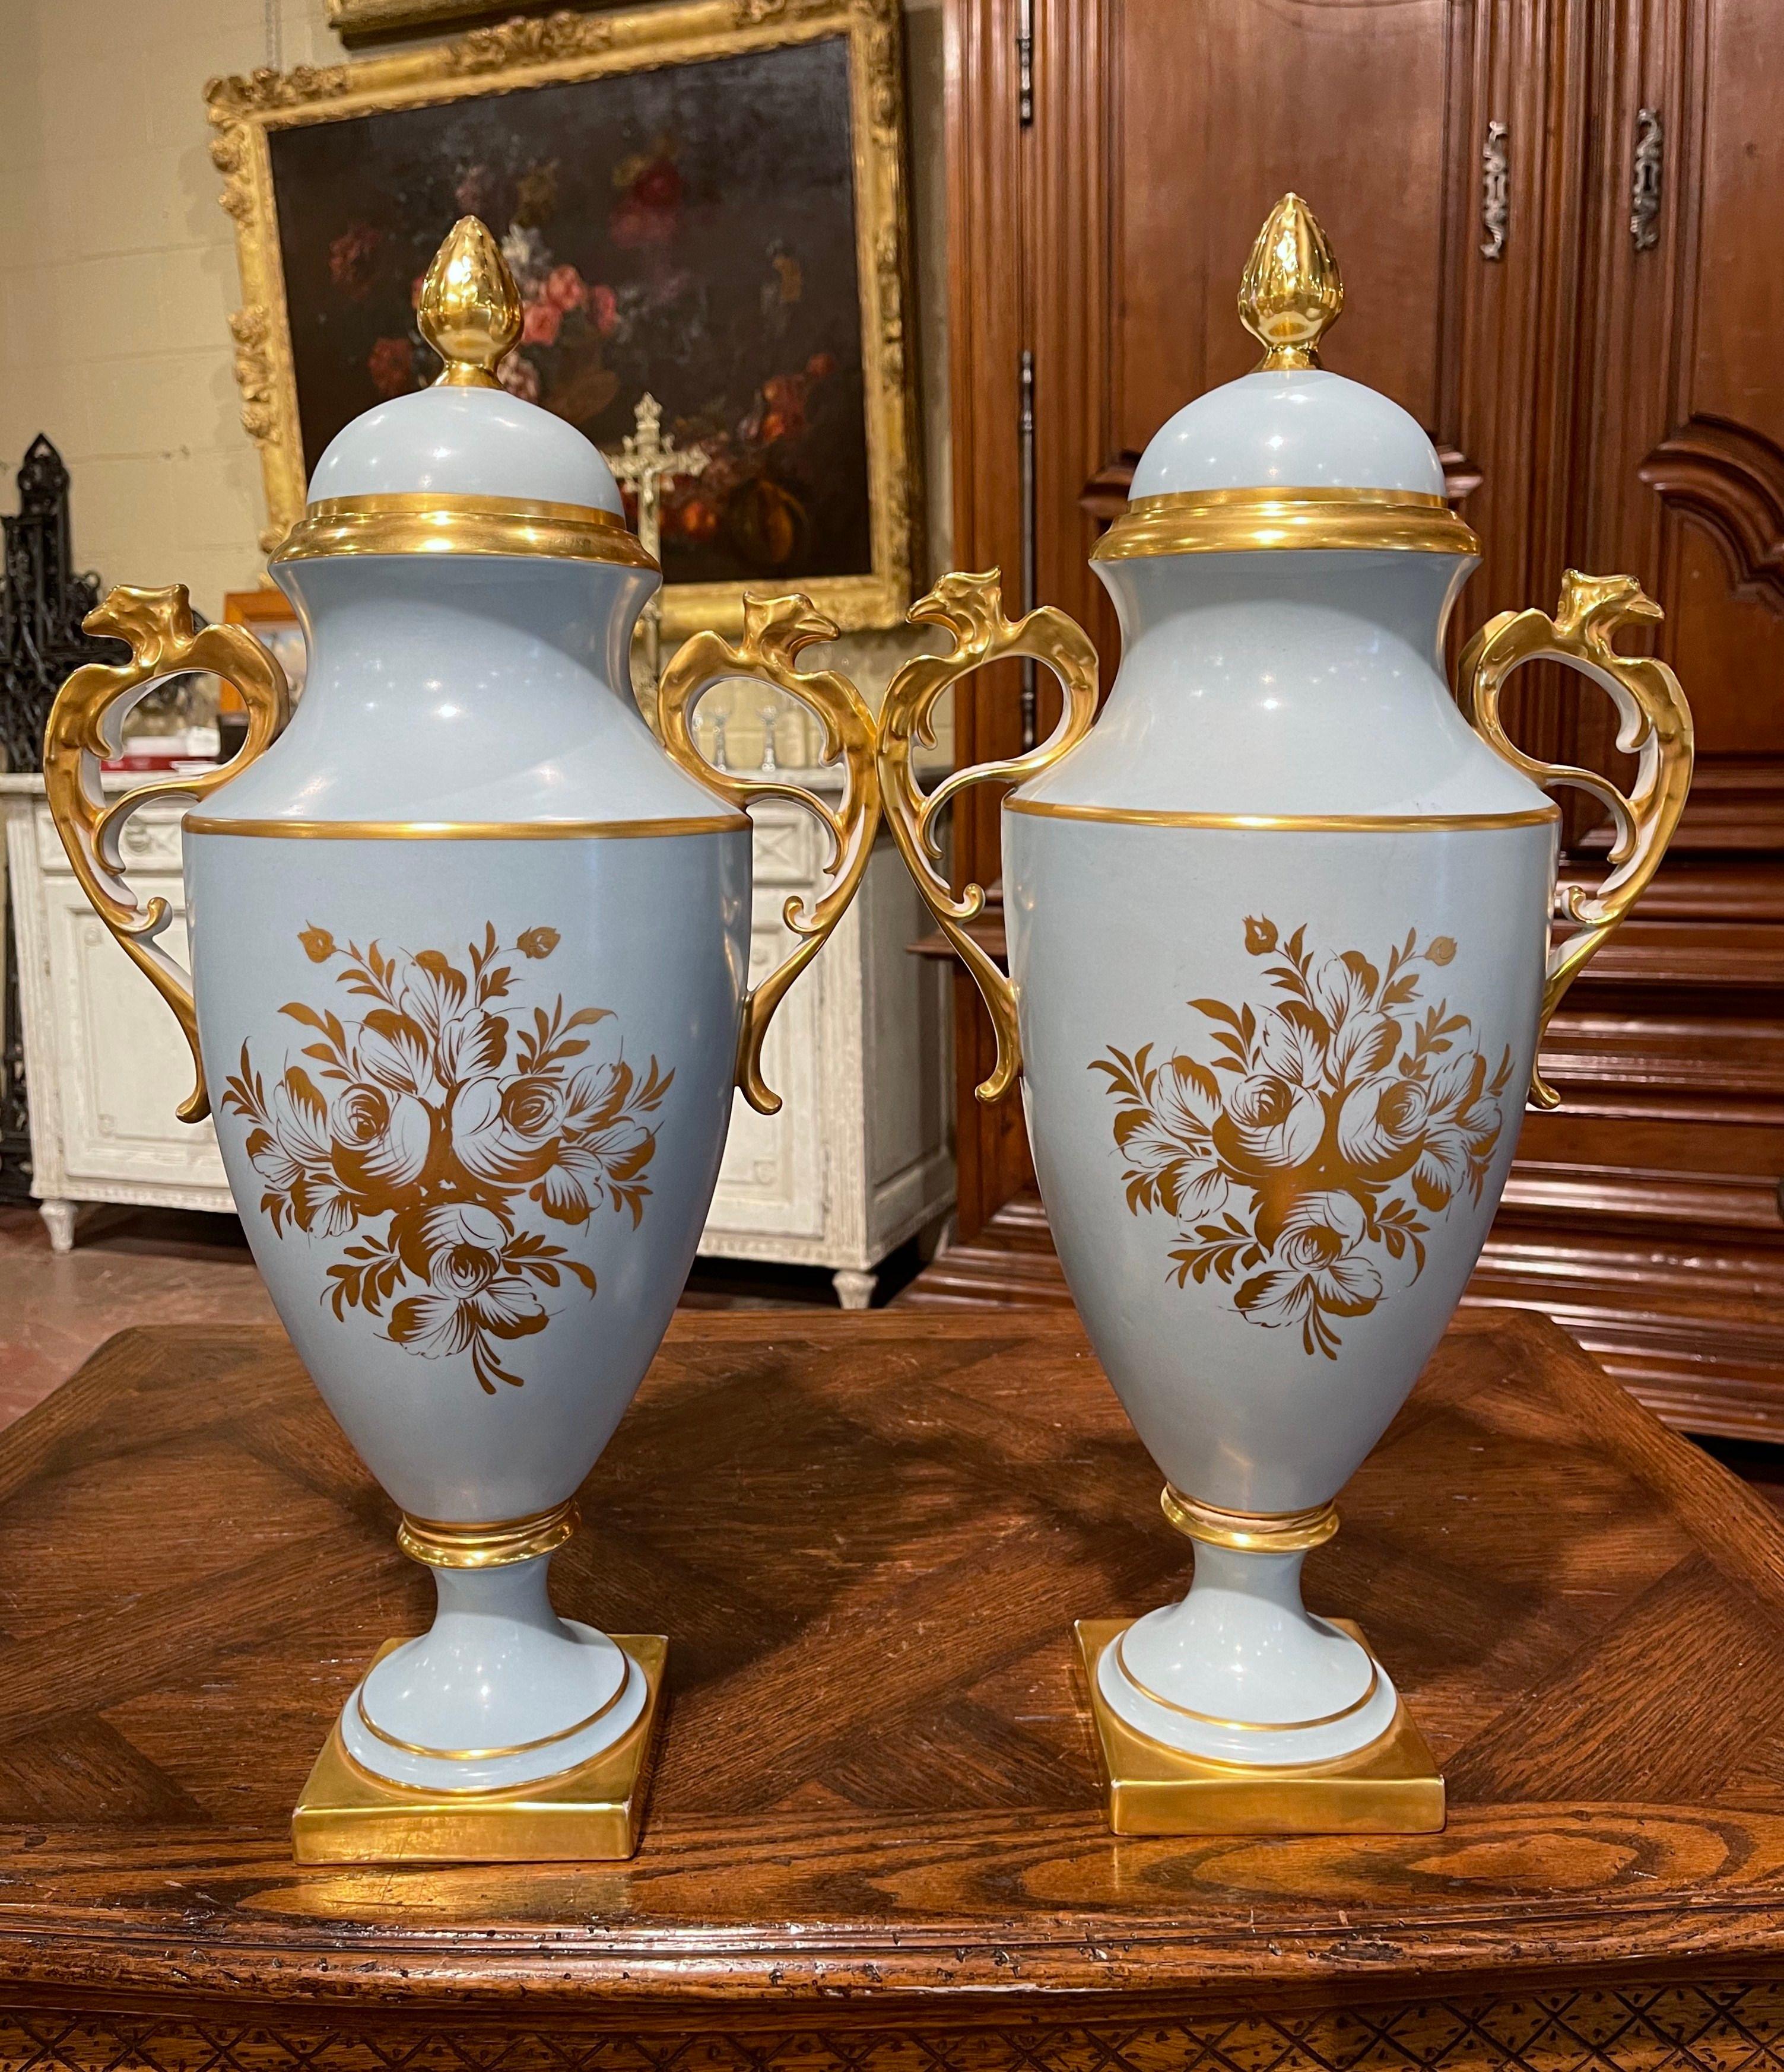 Gilt Pair of Mid-Century French Hand-Painted Porcelain Limoges Urns Signed Rene Caire